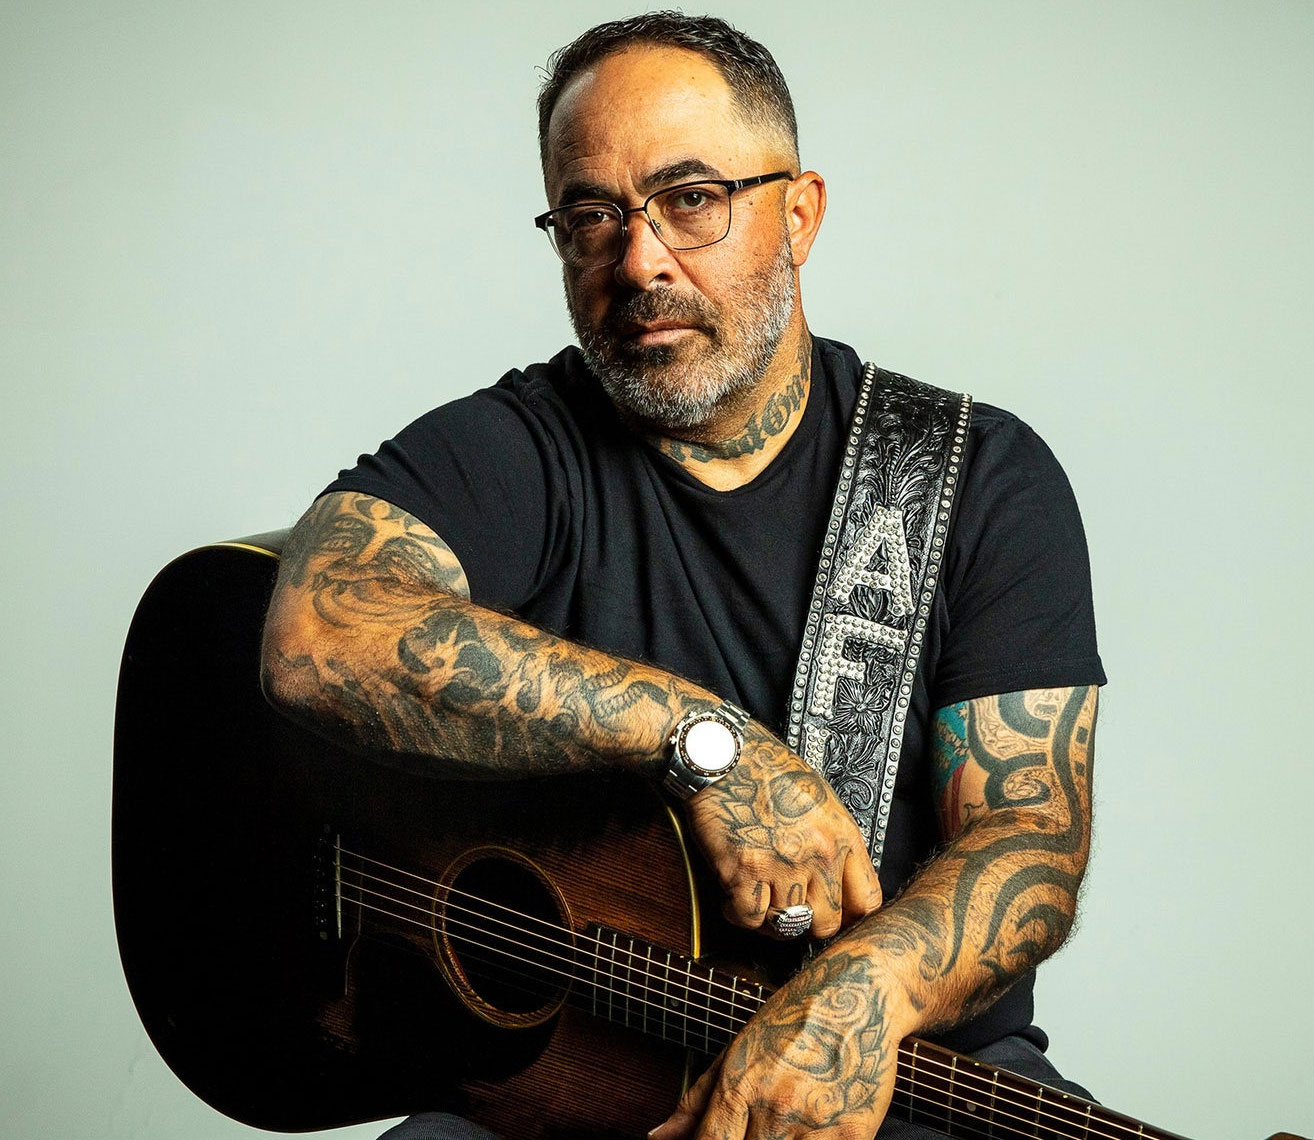 Aaron Lewis: The Acoustic Tour at Foxwoods Resort Casino